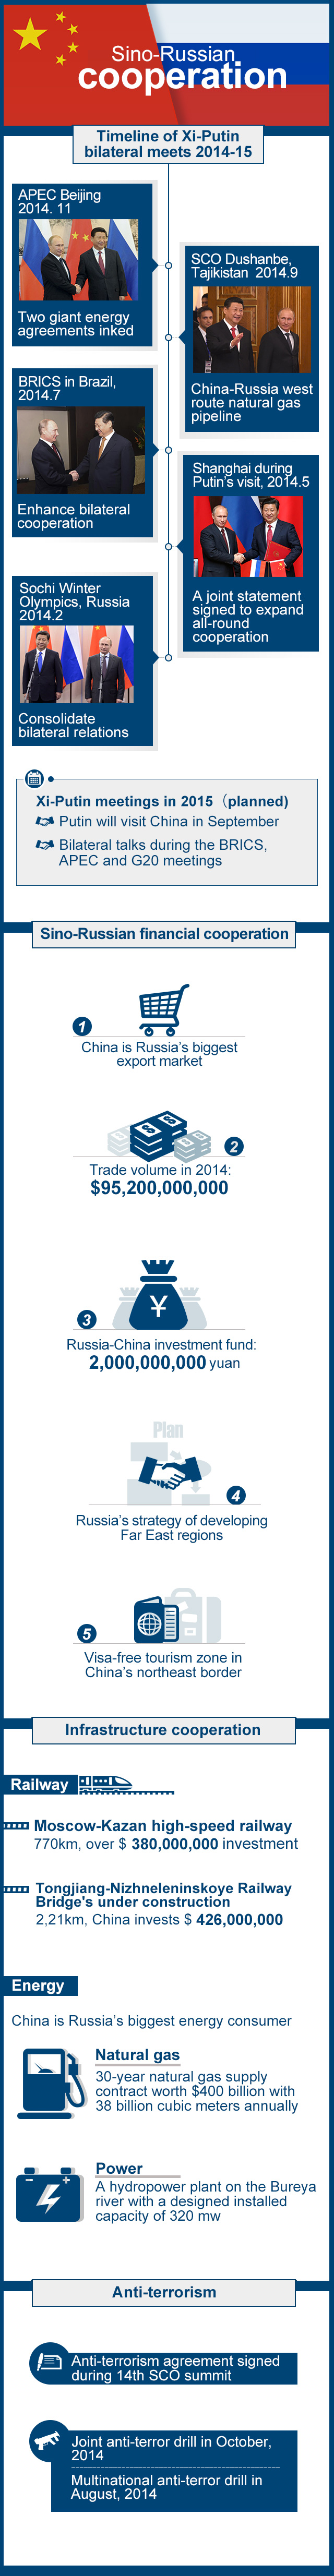 Major facts of Sino-Russian cooperation